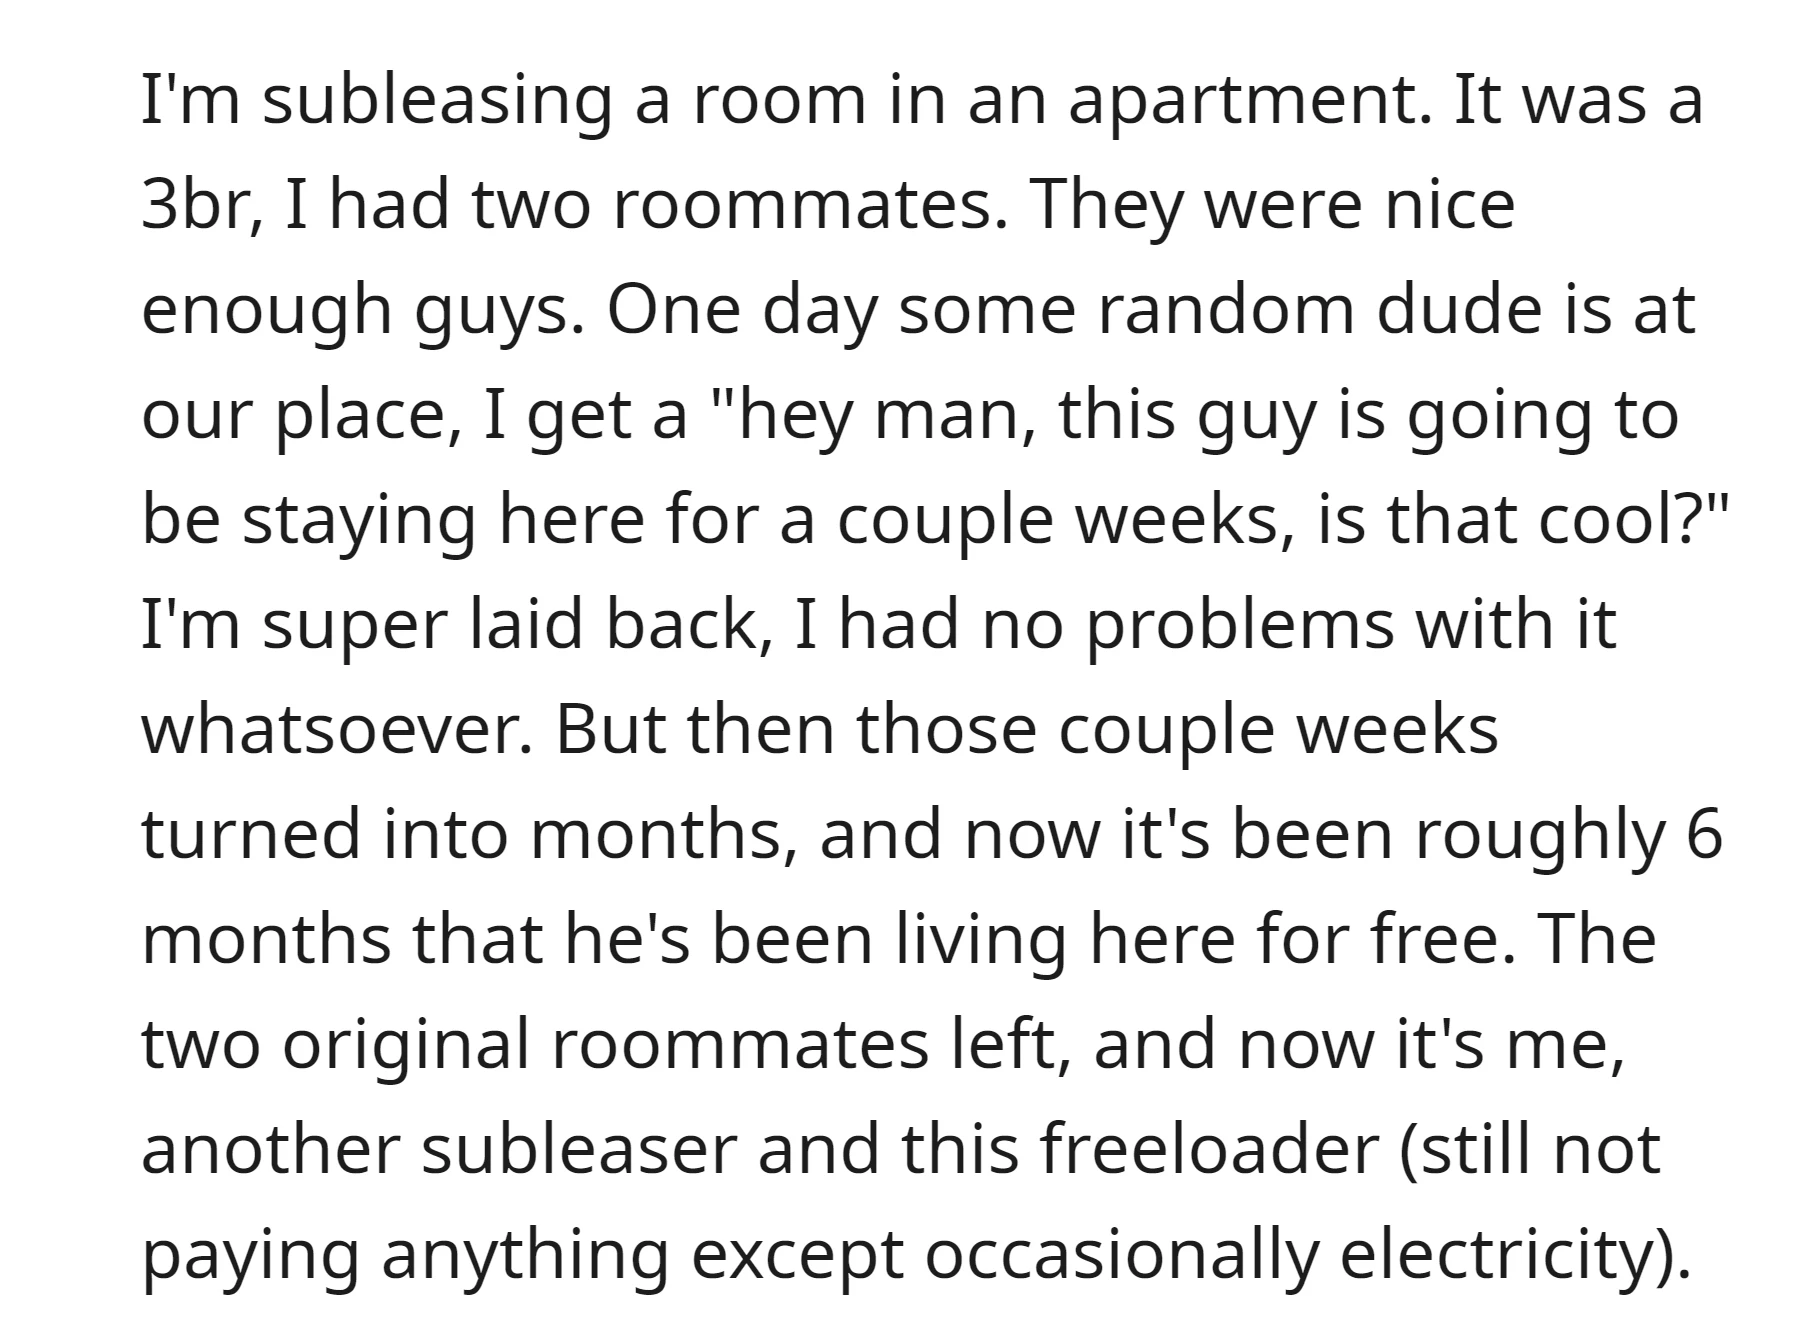 OP subleased a room and agreed to a short stay for a guy, but six months later, he's still there, not paying rent